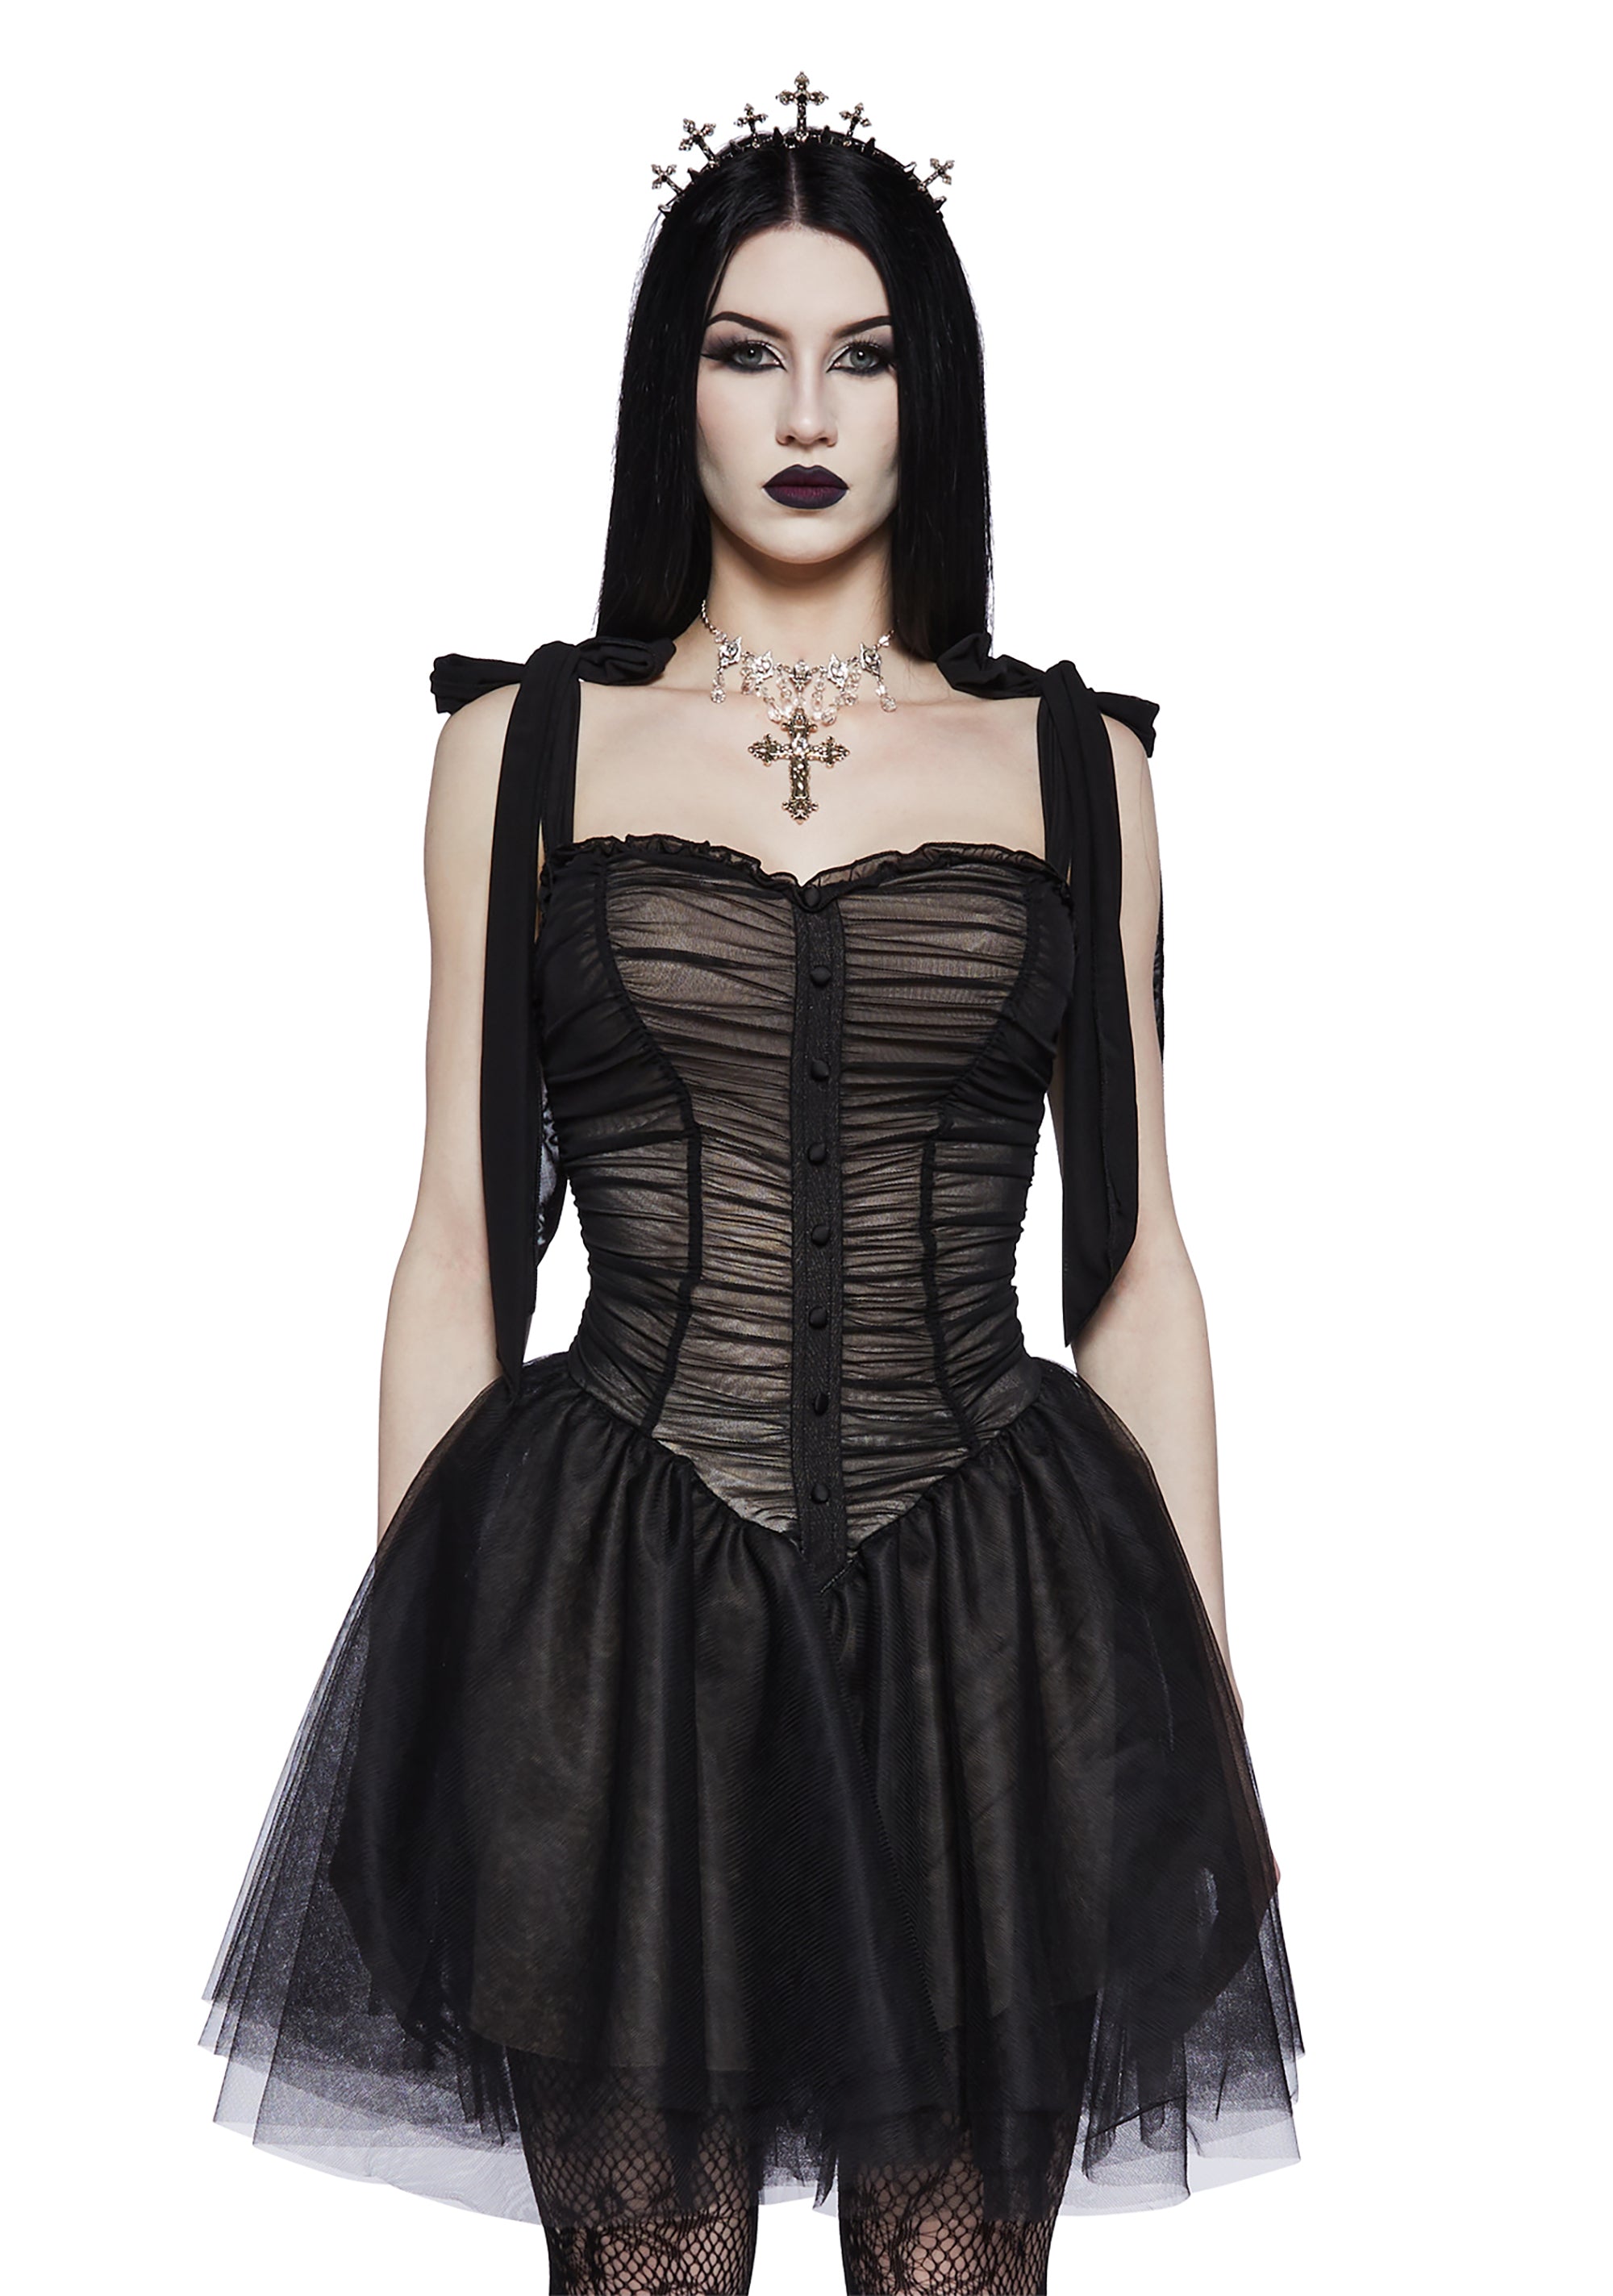 Plus Size Gothic Clothing – The Mystery Of The Dark!